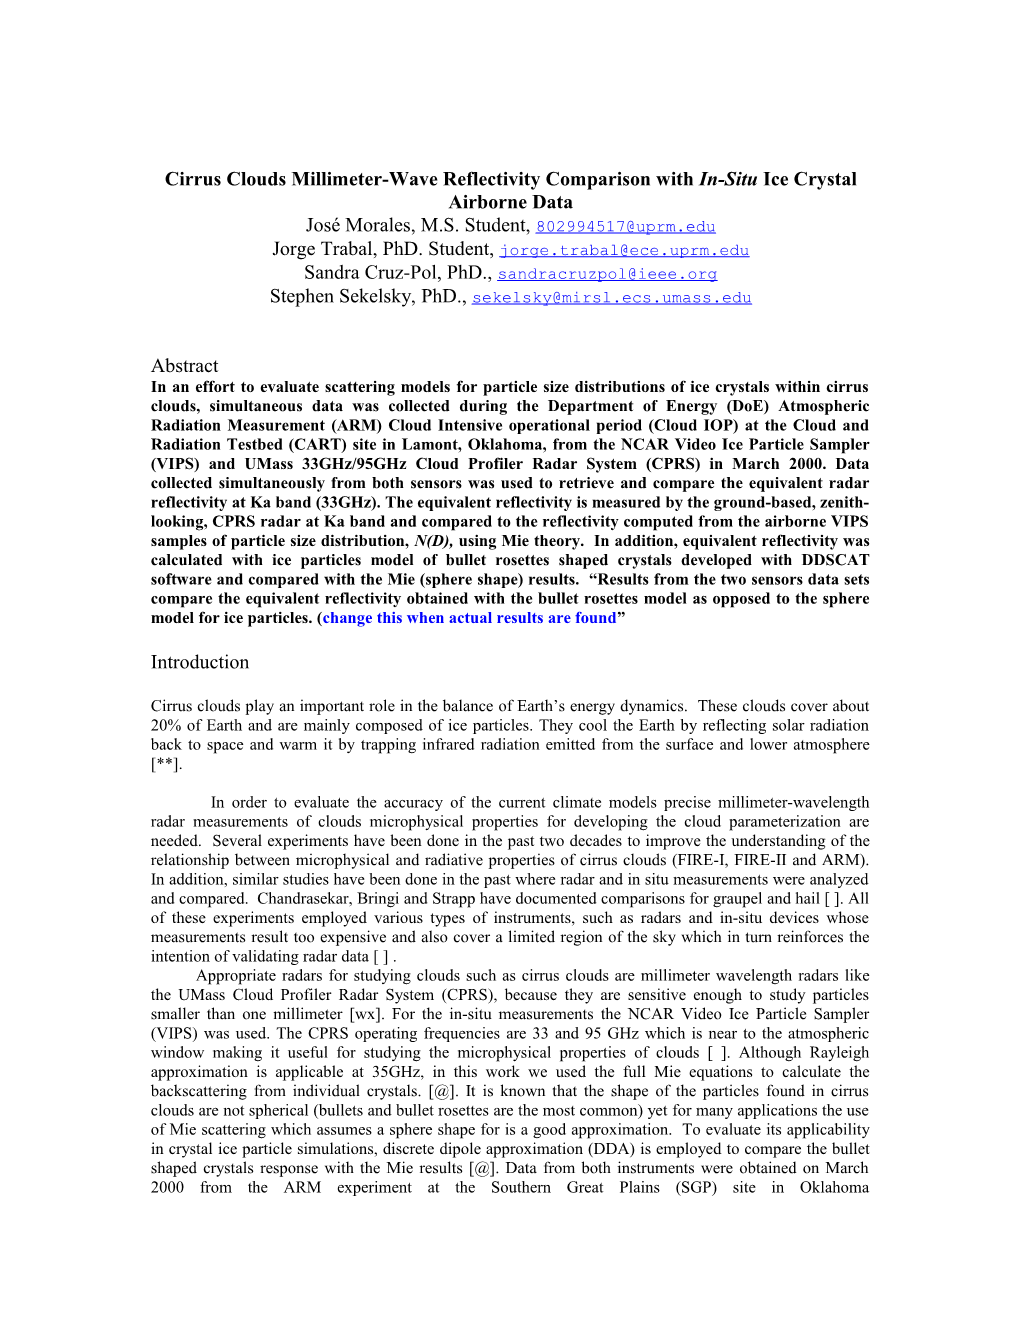 Cirrus Clouds Millimeter-Wave Reflectivity Comparison with In-Situ Ice Crystalairborne Data